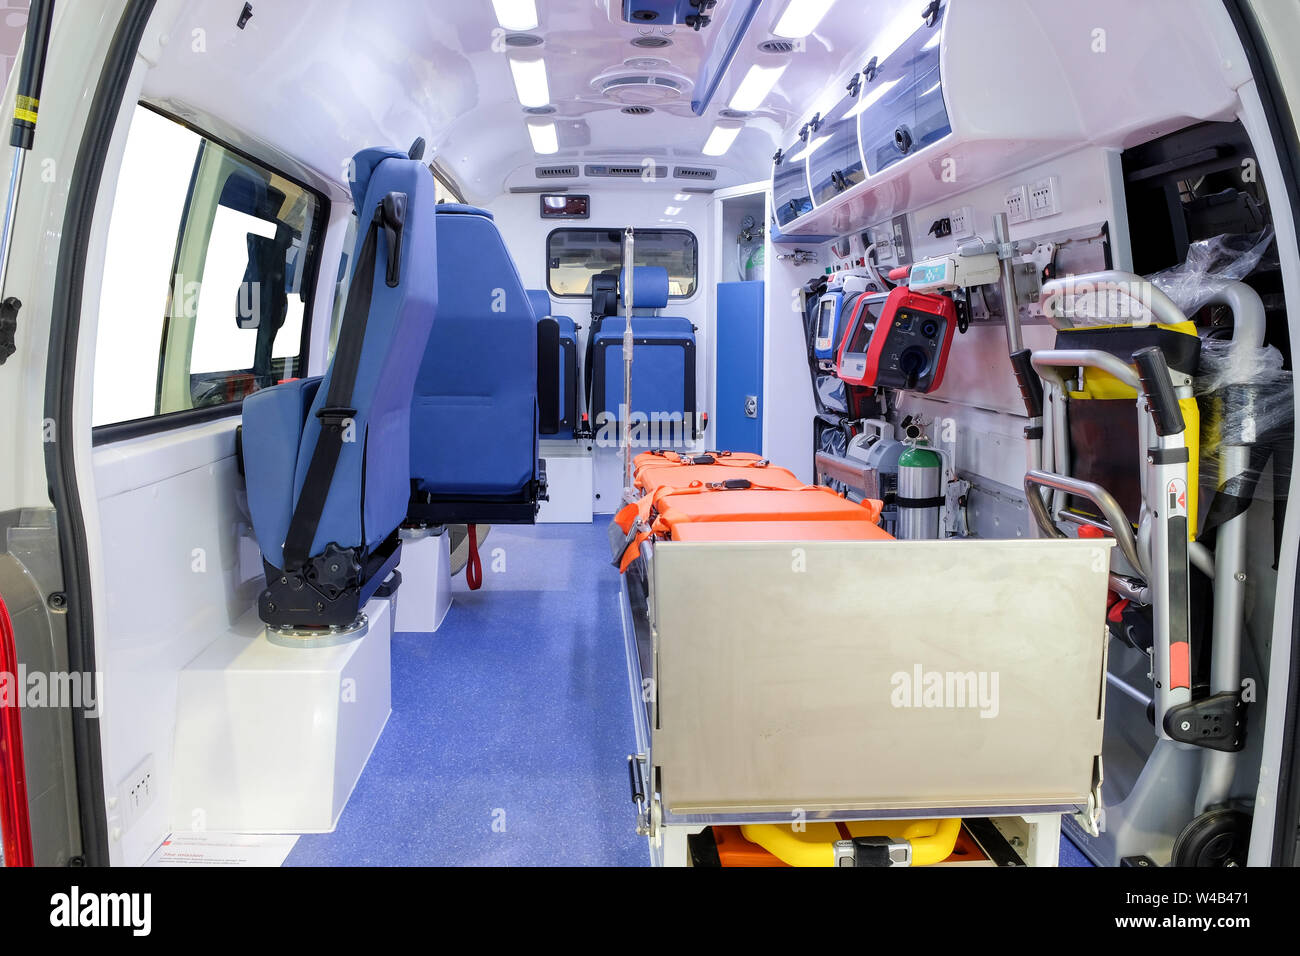 Inside an ambulance car with medical equipment for helping patients before delivery to the hospital. Stock Photo